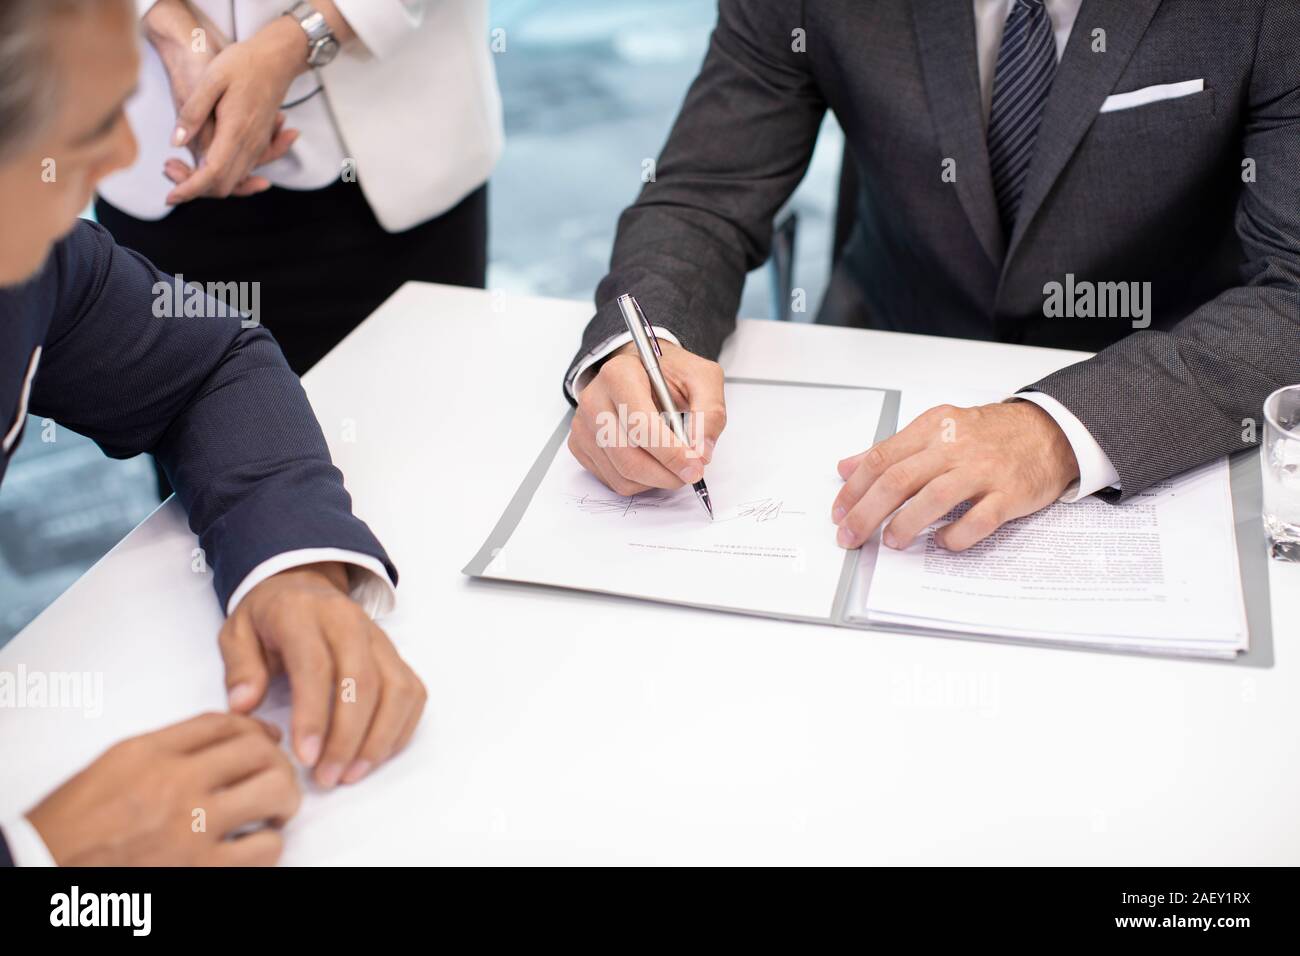 Business people signing contract in conference room Stock Photo